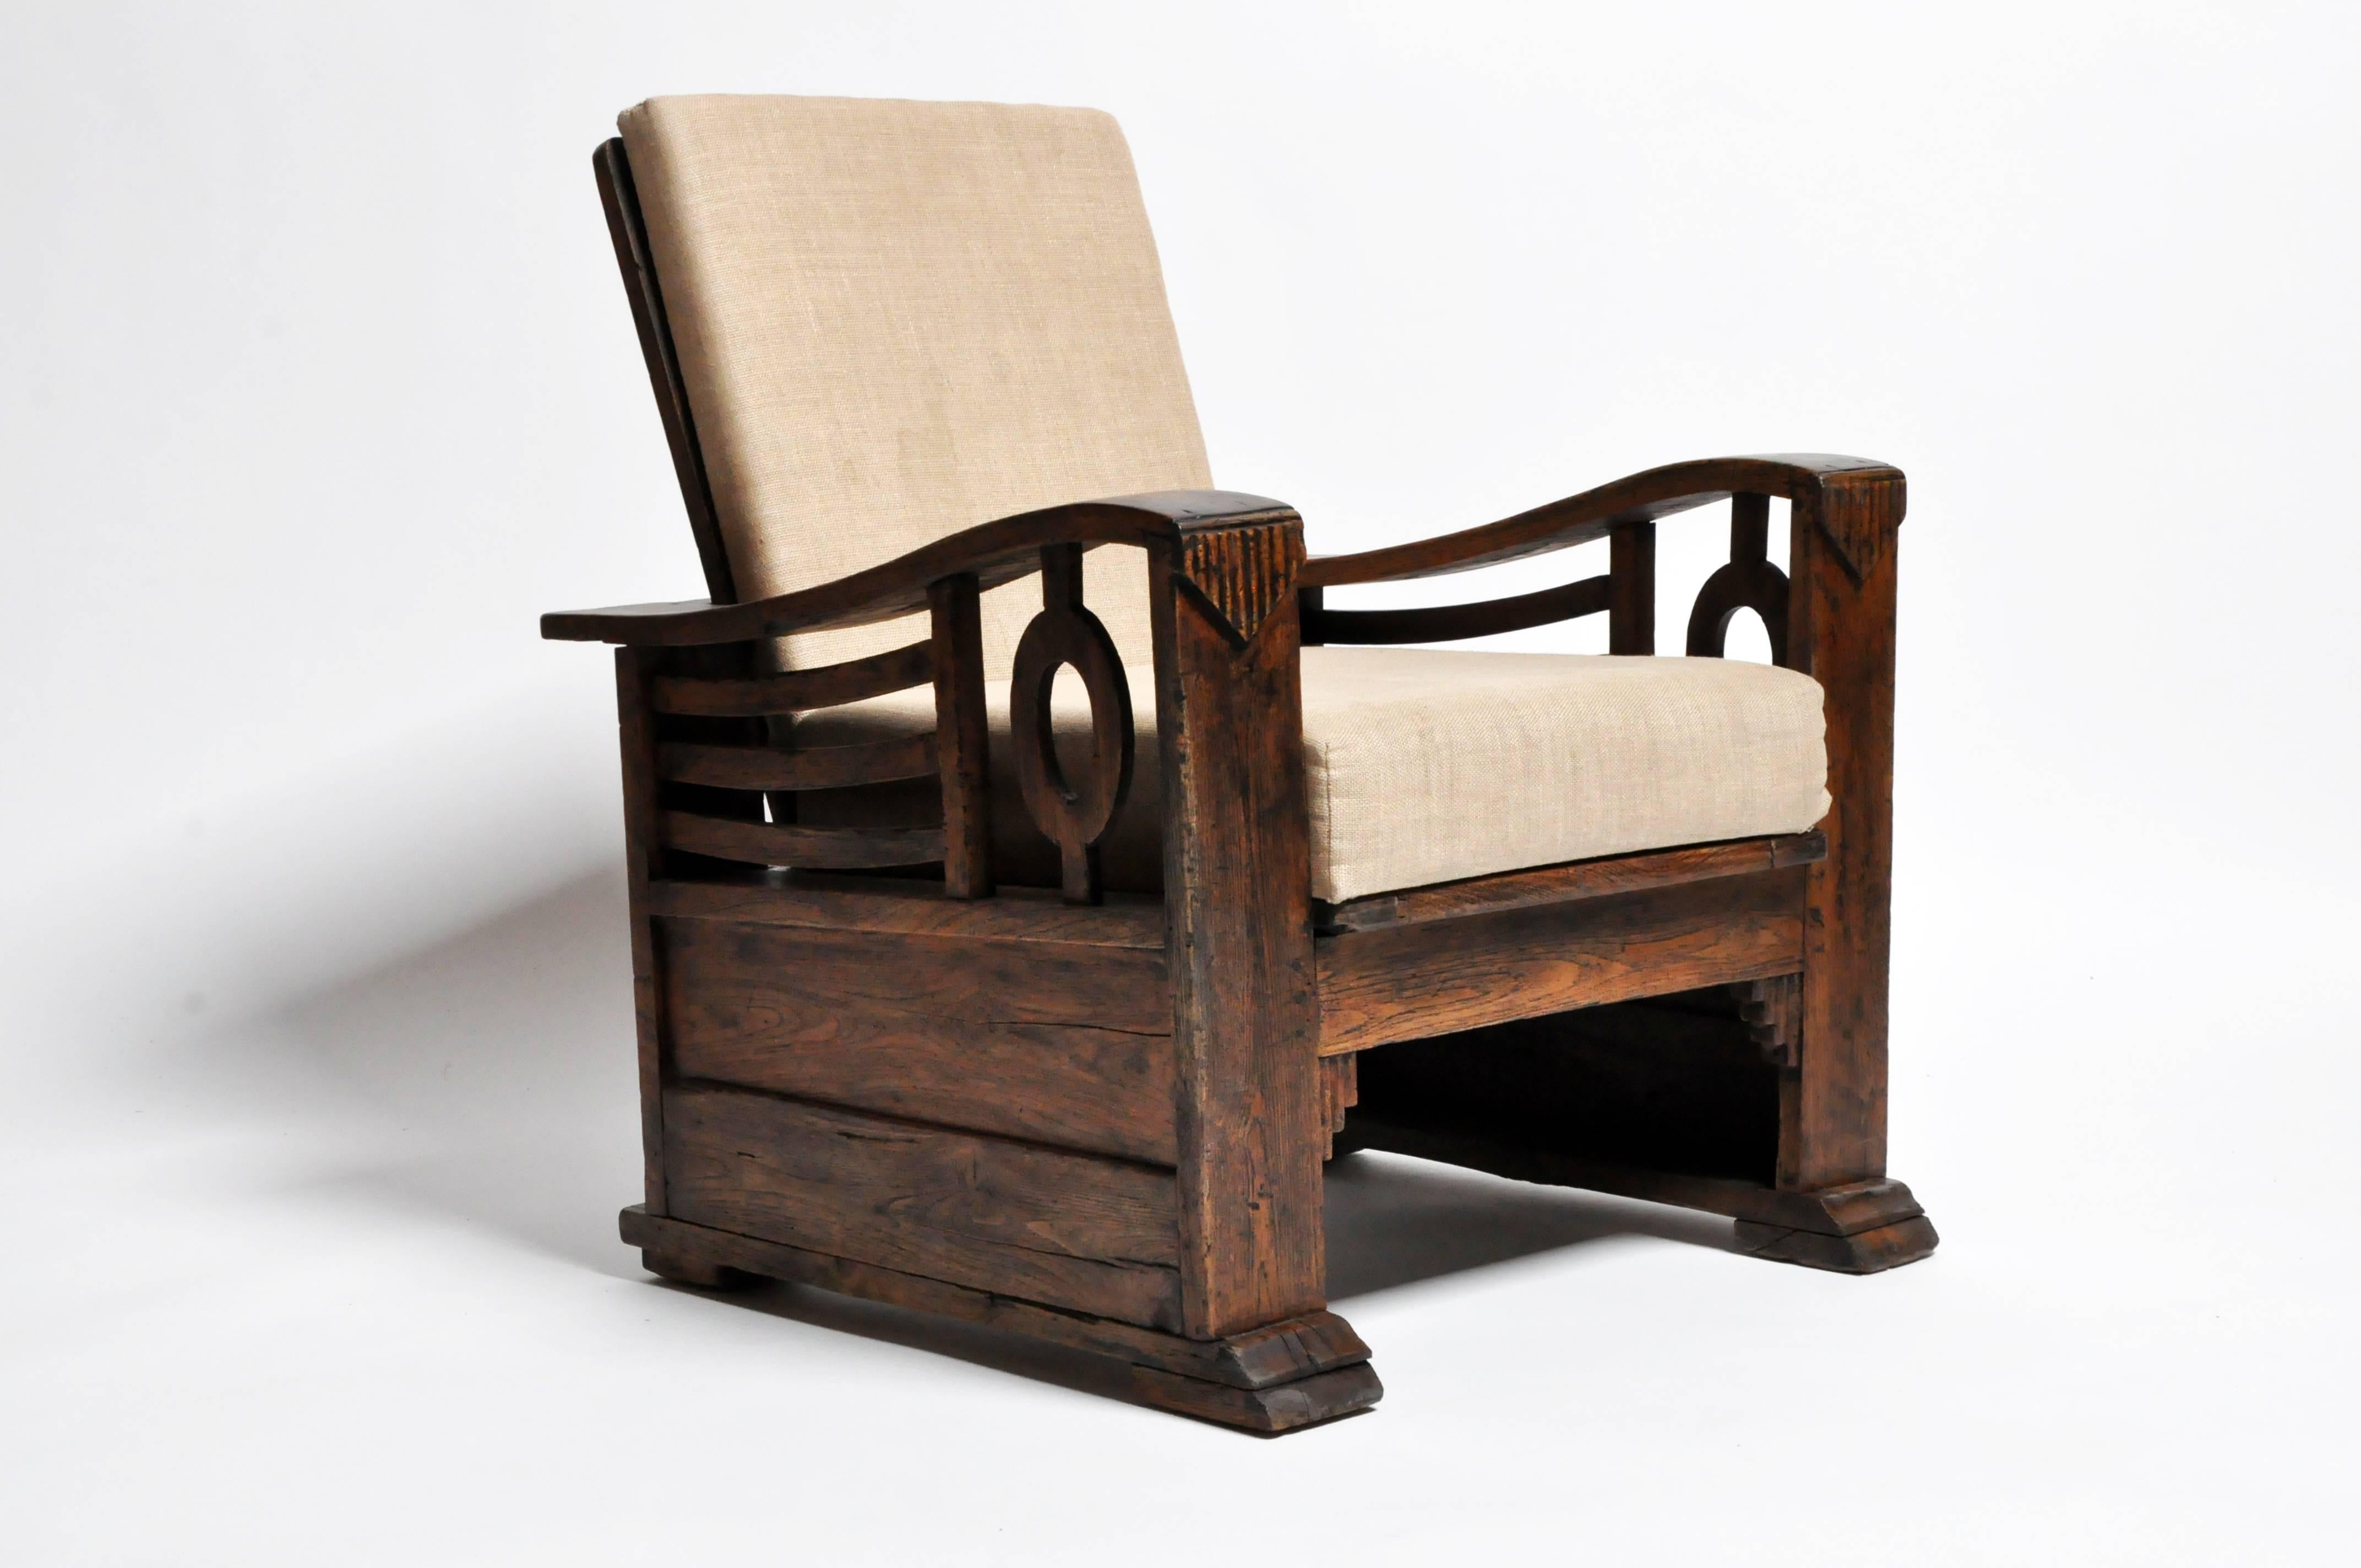 This handsome pair of British Colonial Art Deco chair is from India and made from teak wood, circa 1960.